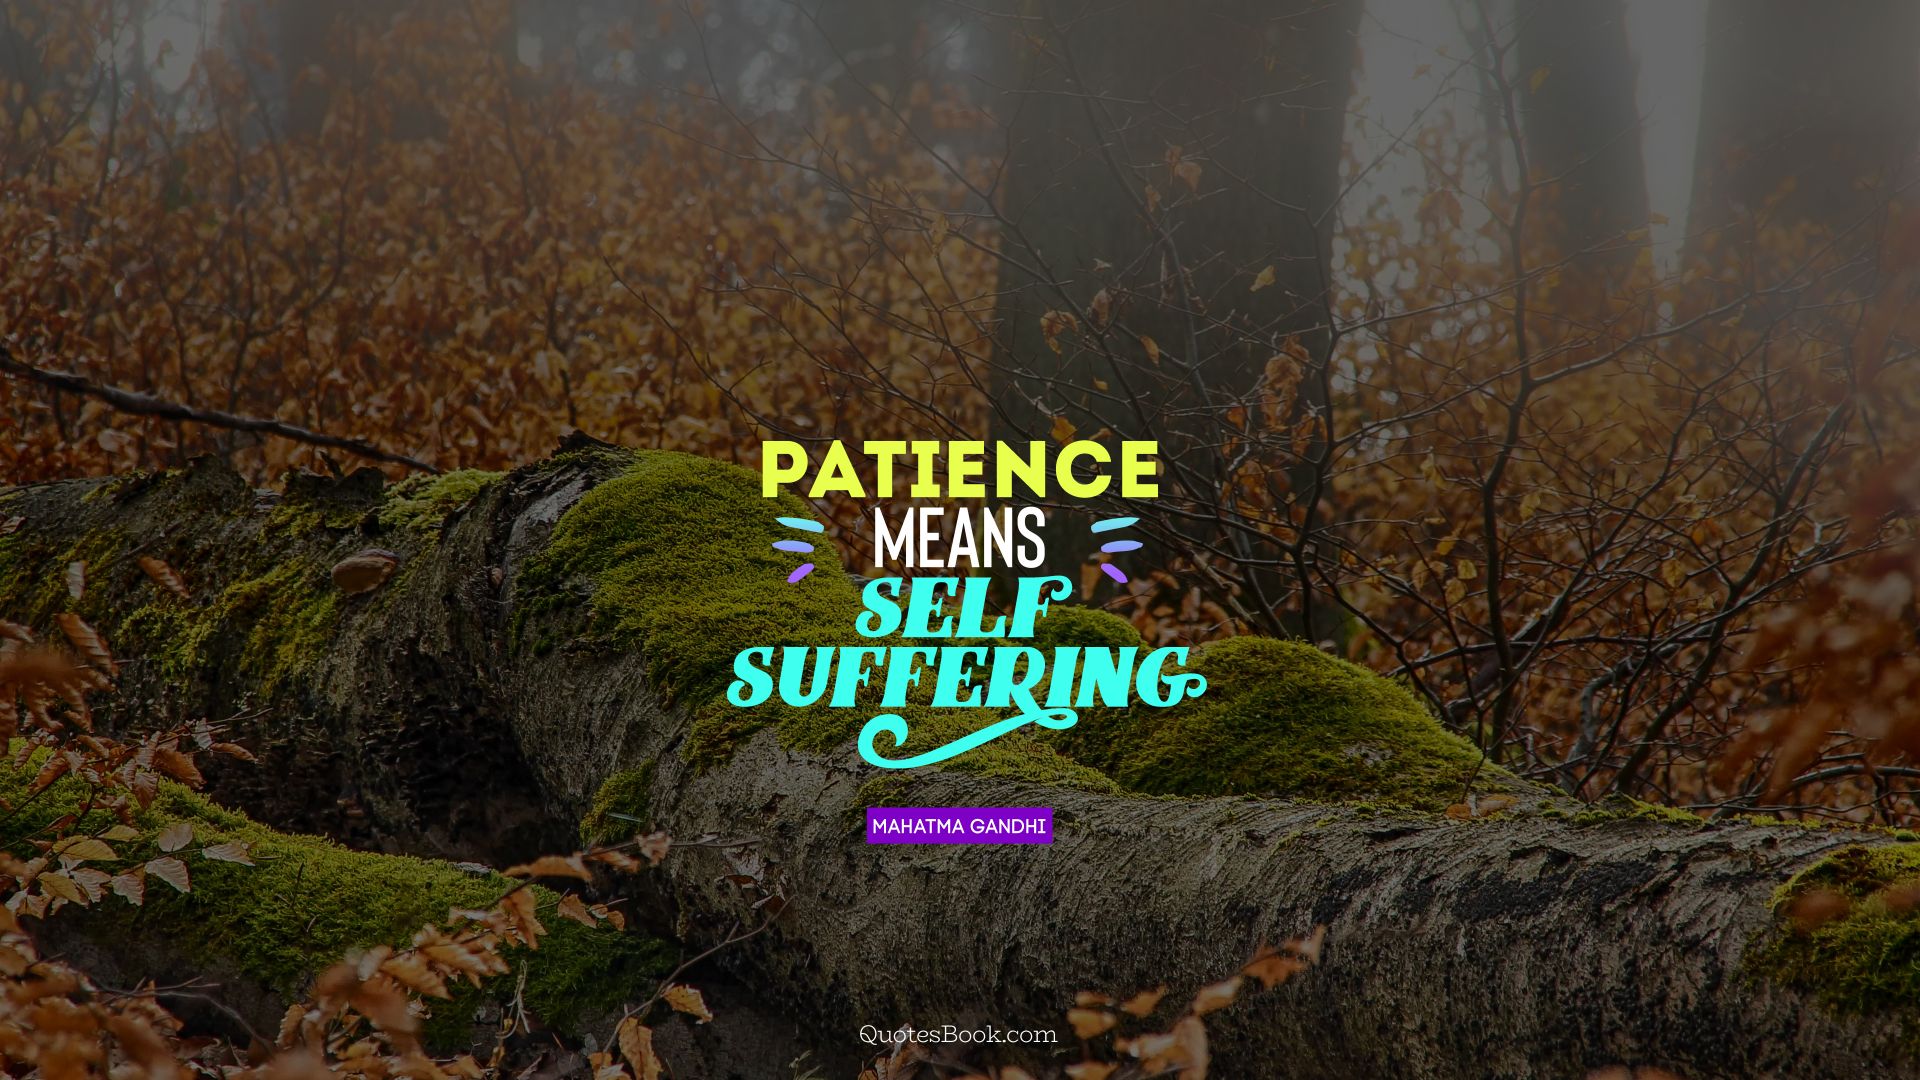 Patience means self-suffering. - Quote by Mahatma Gandhi